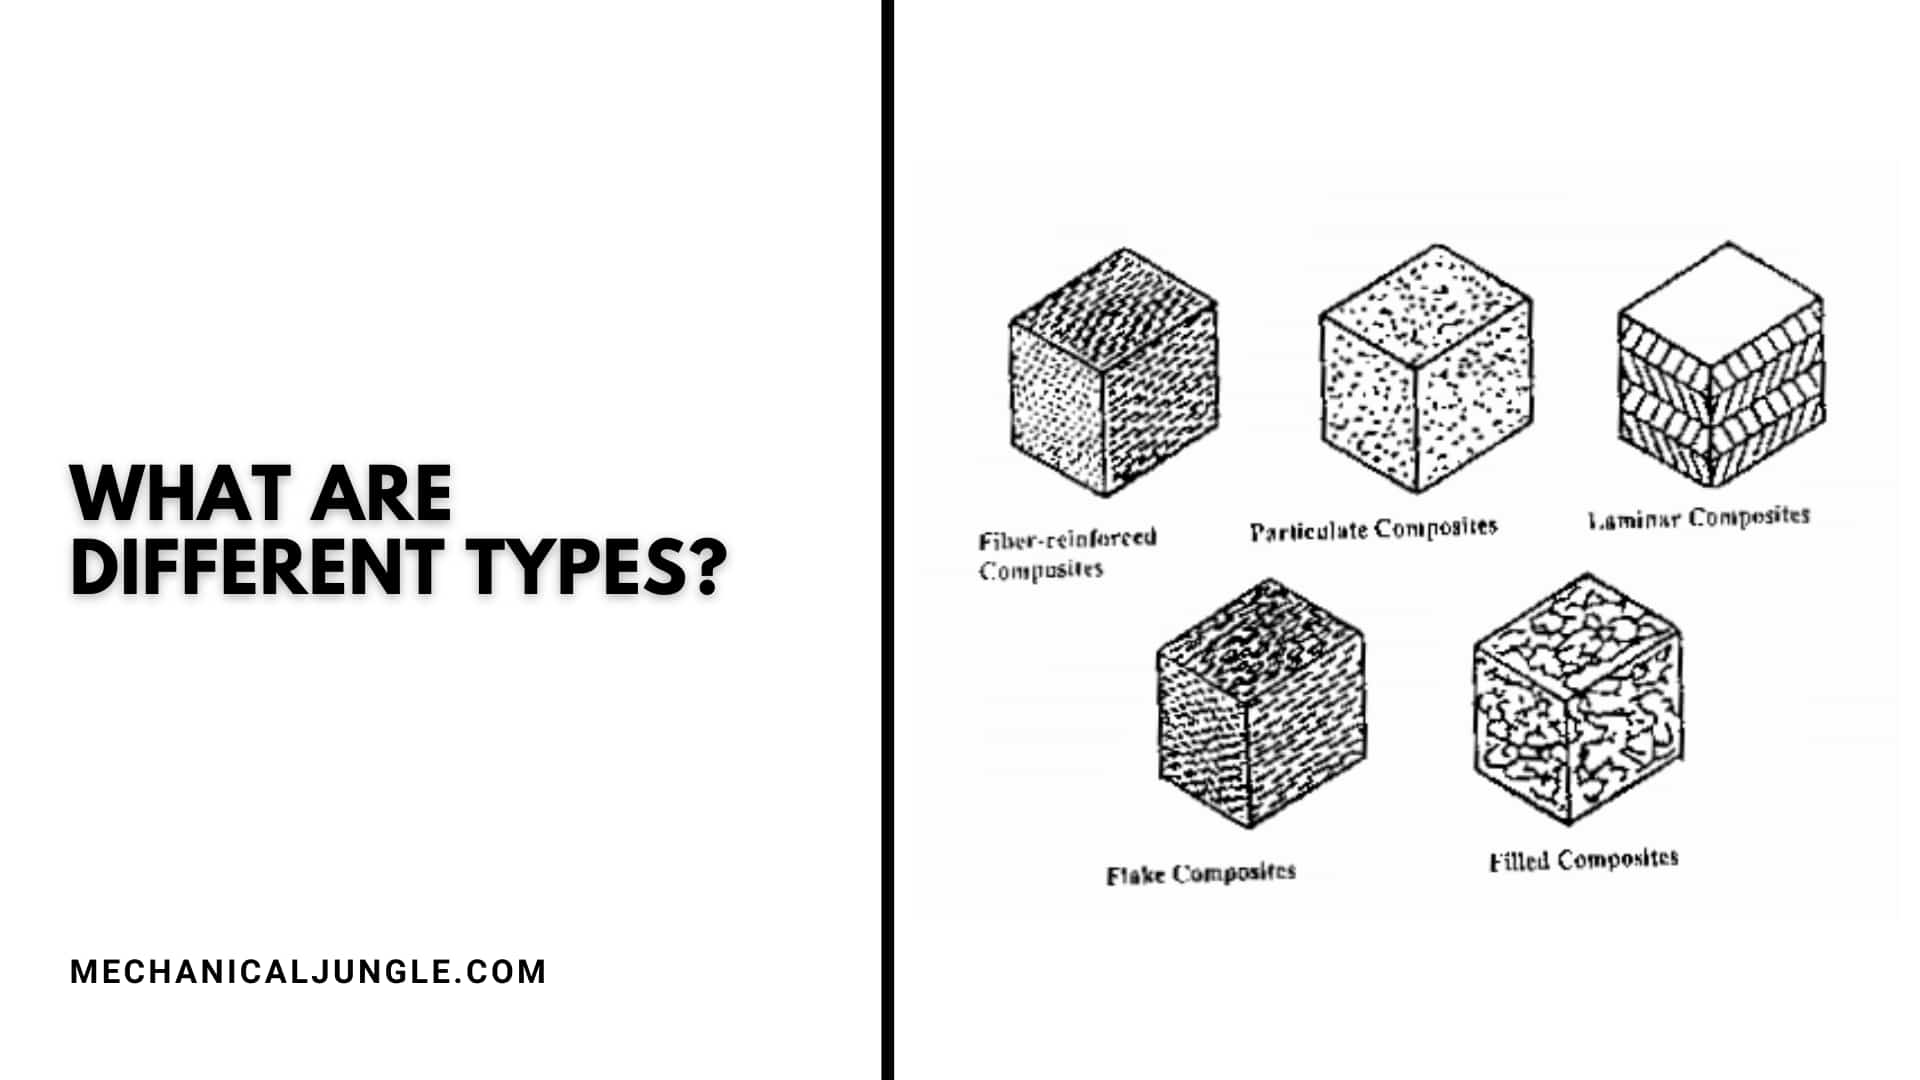 What Are Different Types?